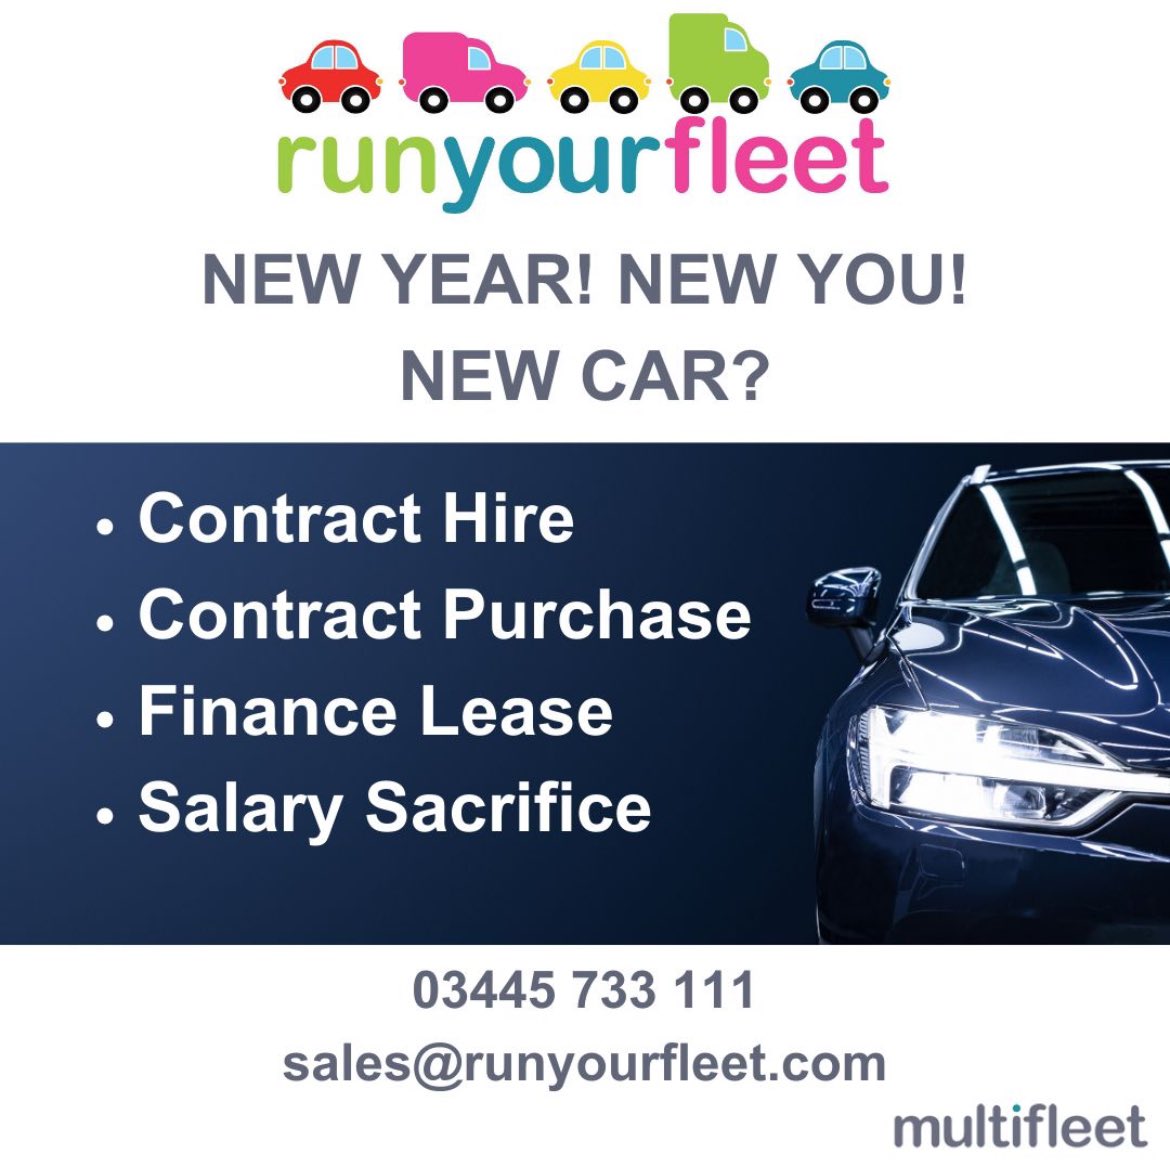 Our fleet funding options let you ditch the risks and stay in control! Contact us today to discuss the best option for you and your business. #fleetfunding #financelease #salarysacrifice #ev #contracthire #fleetmanagement #vehicleleasing 🚚 🚗 🚙